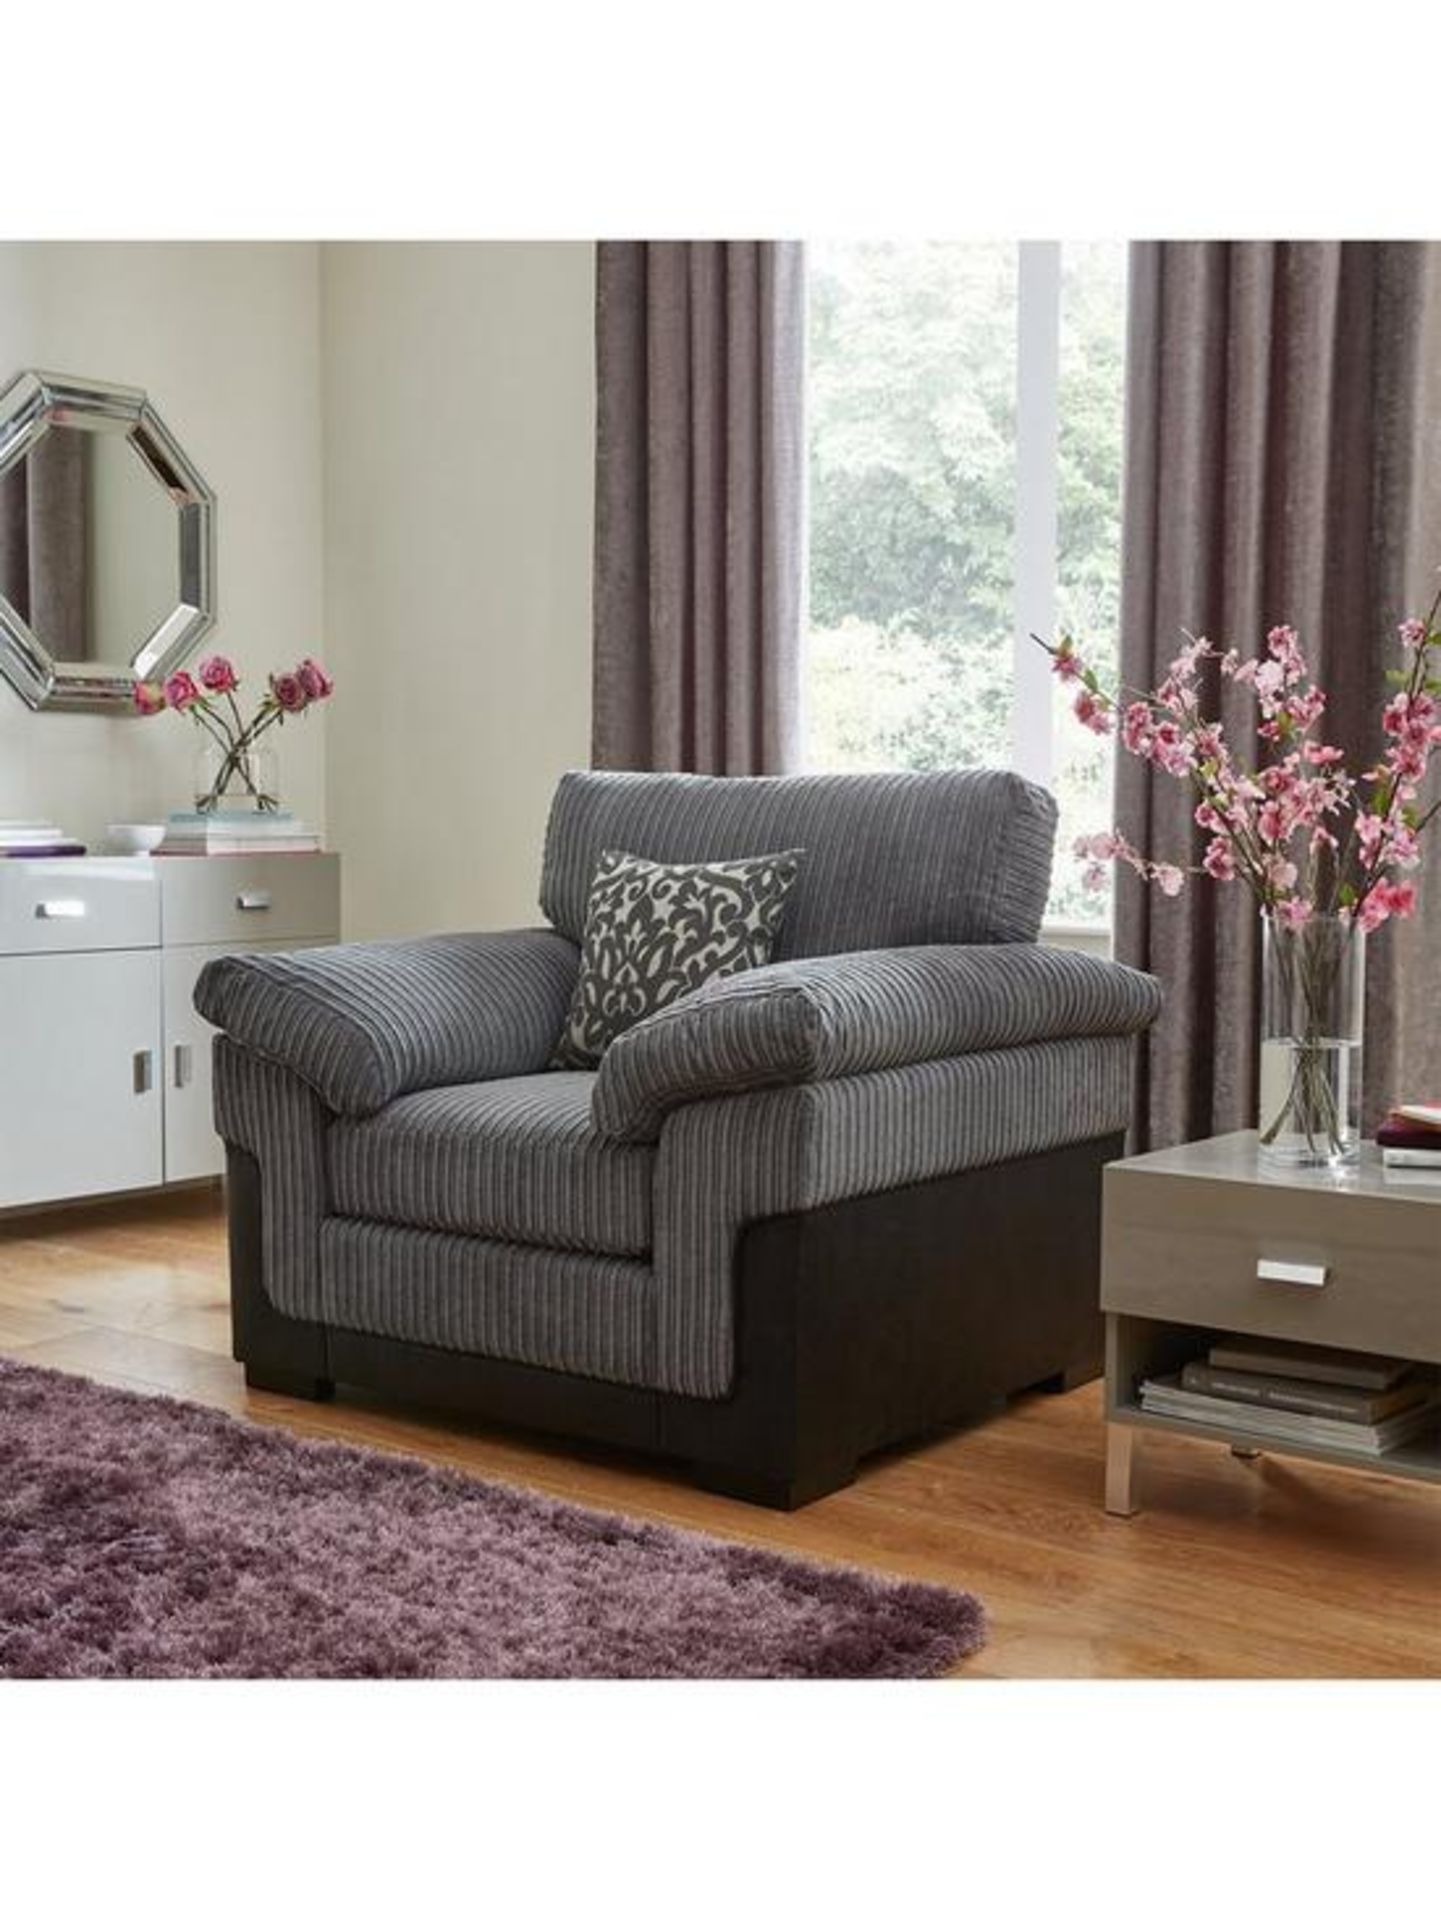 Phoenix Chair. RPP £509.00. Fabric fusion Chunky lines of soft jumbo cord give the inner a